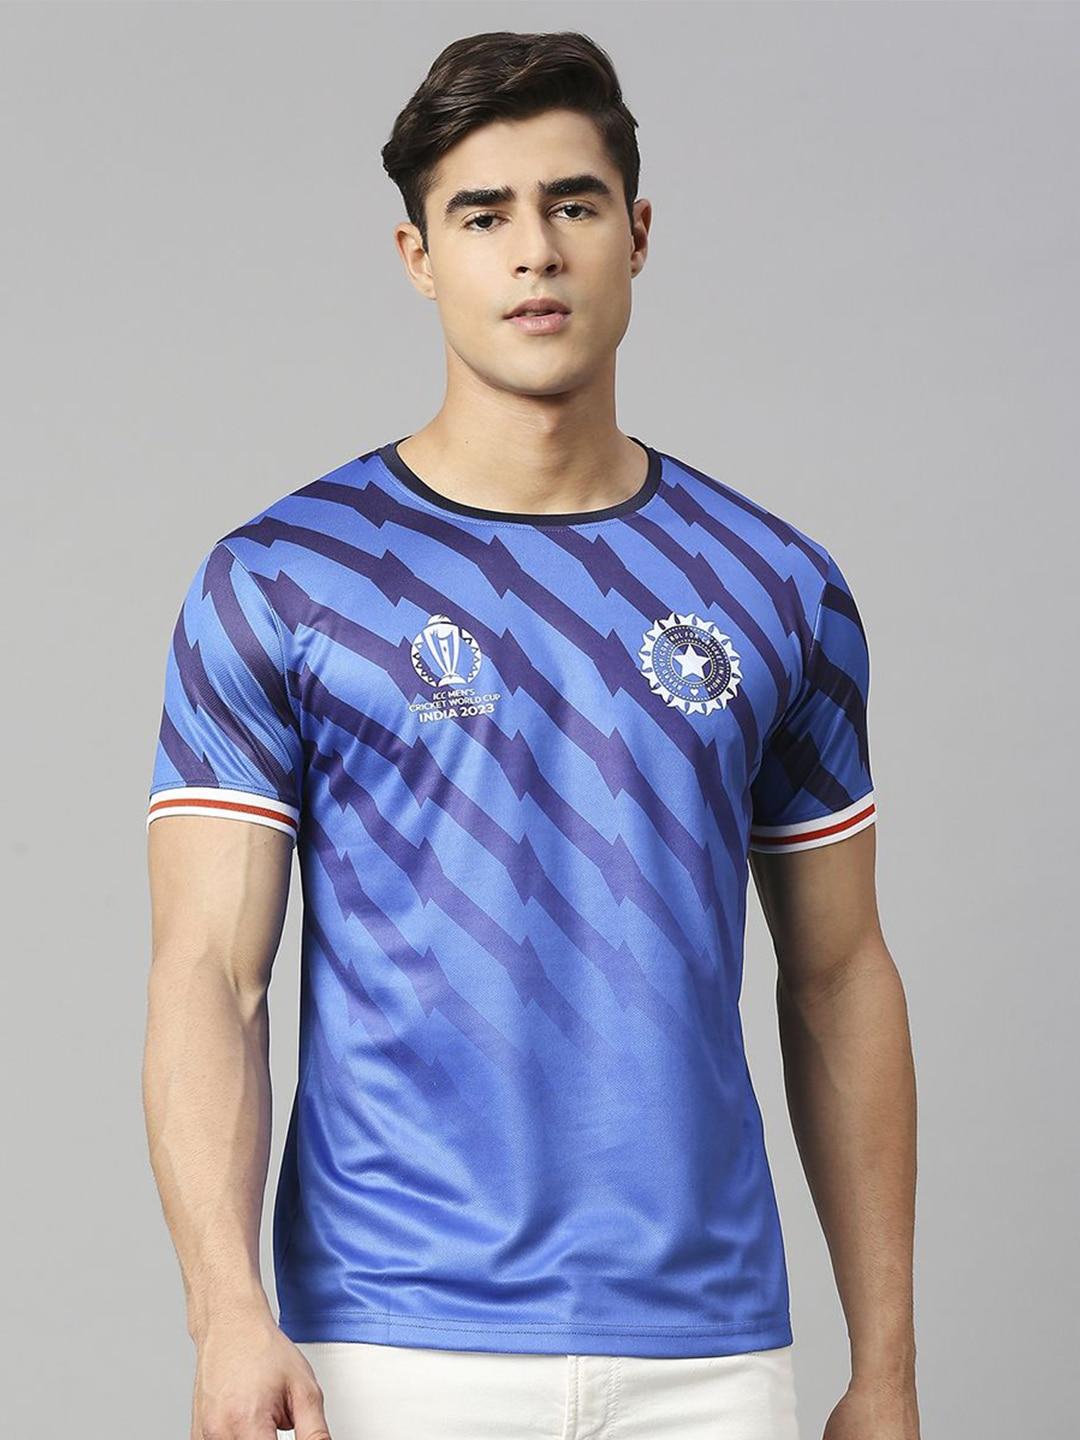 fancode-men-blue-printed-extended-sleeves-bio-finish-applique-t-shirt